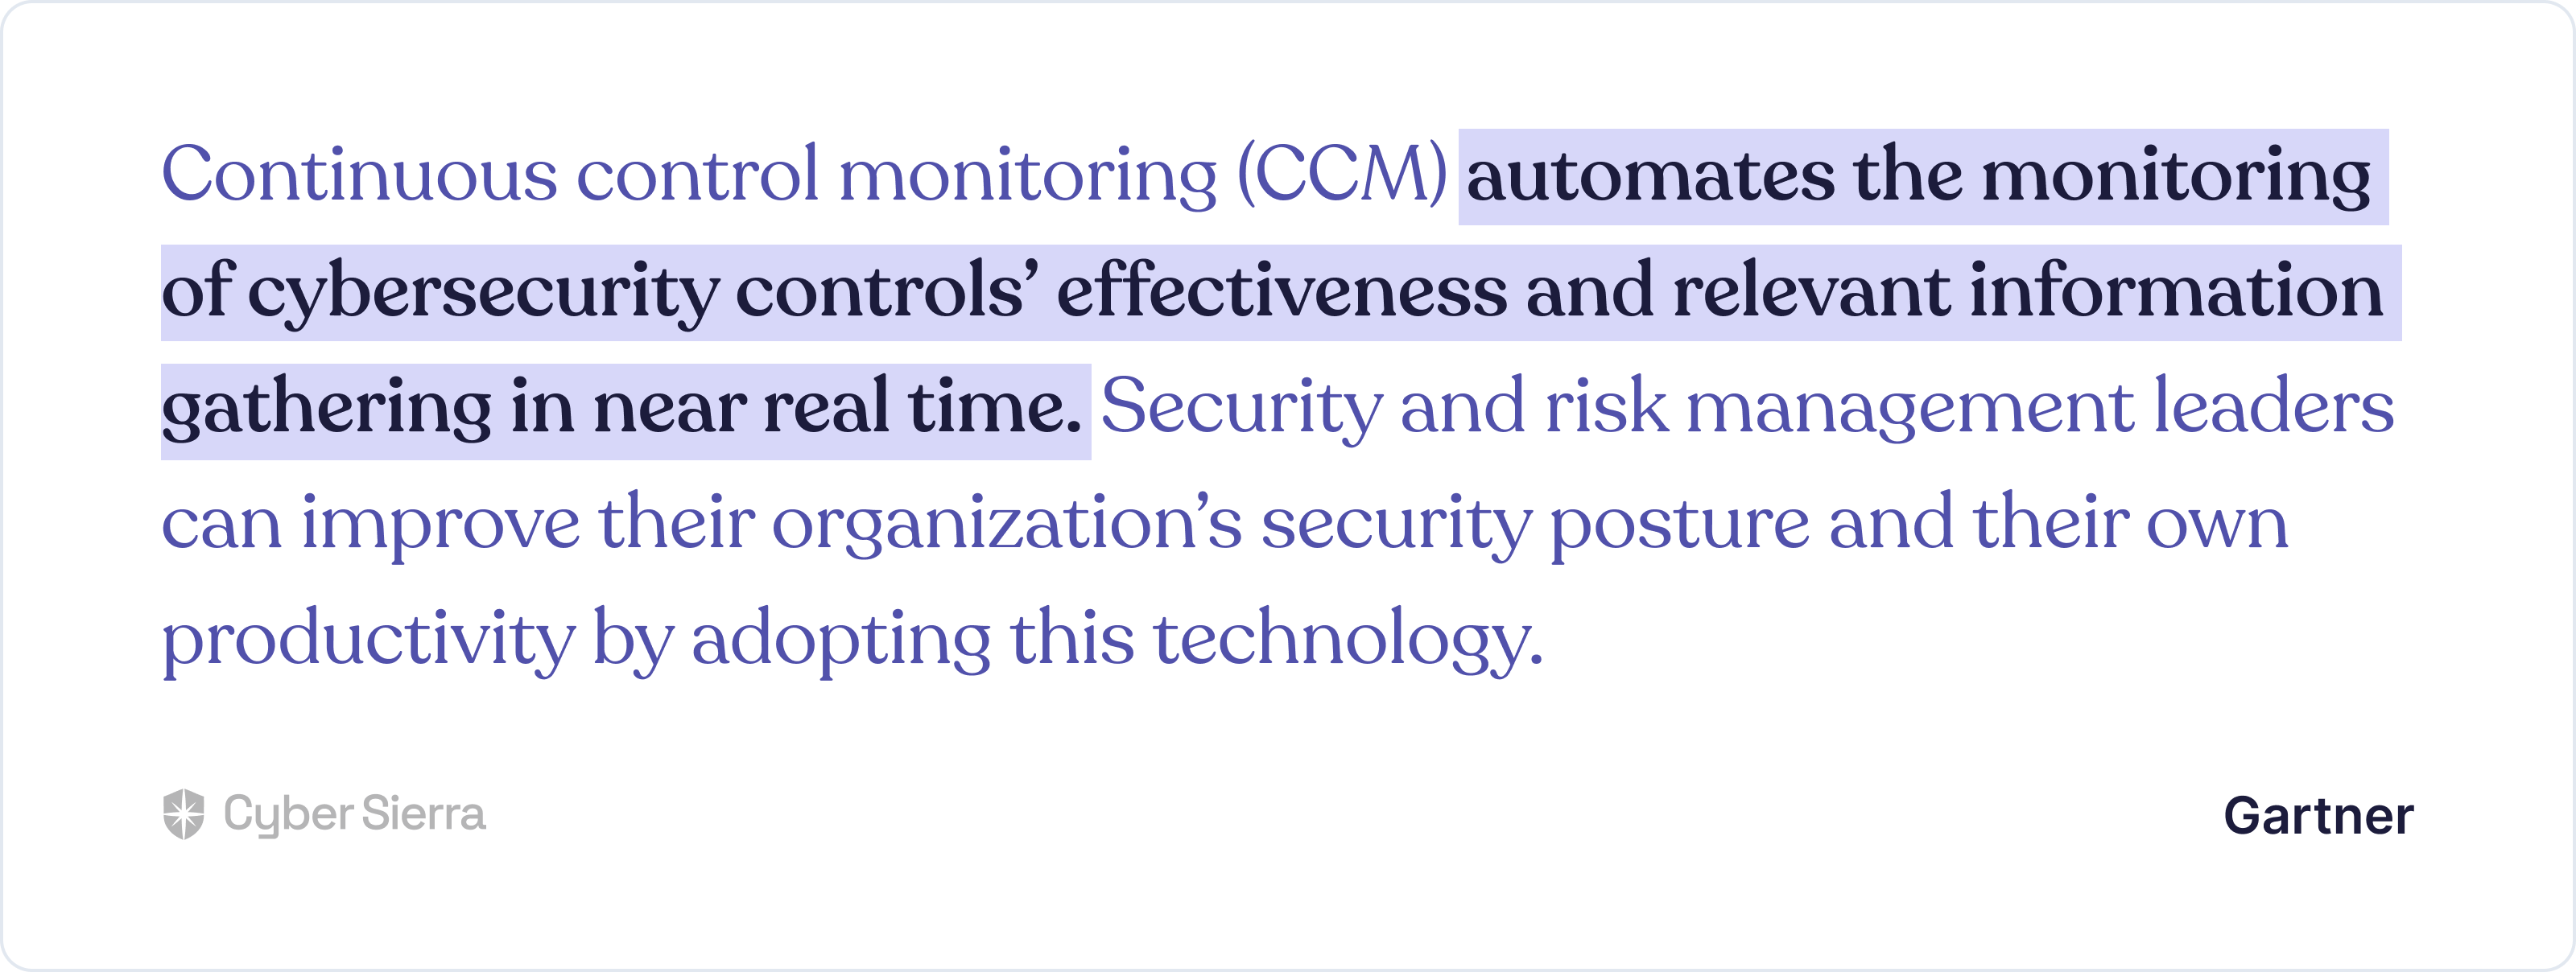 By adopting CCM, enterprise security executives can proactively improve their company’s cybersecurity posture while being more productive. But achieving these desirable outcomes is no mean feat. 